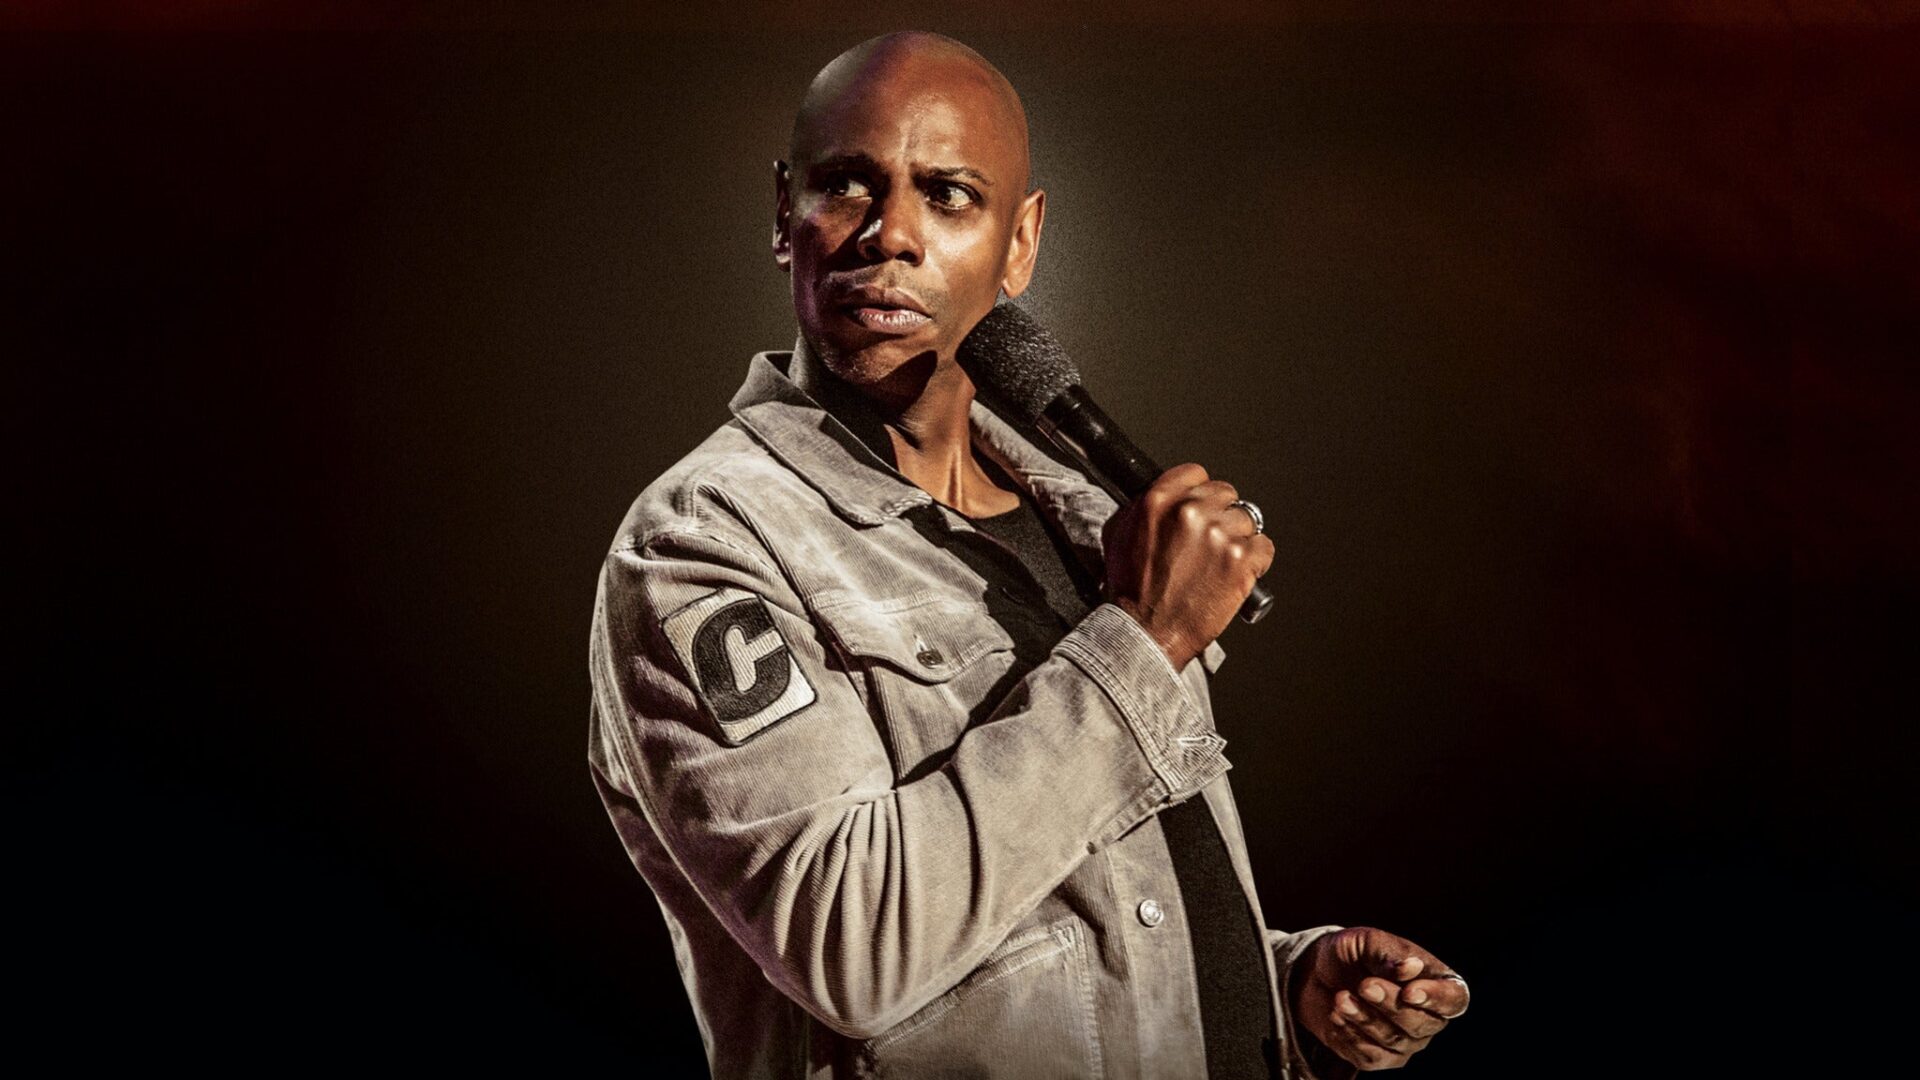 Dave Chapelle coming to Arundel Mills for 10th anniversary celebration at Live! Casino & Hotel